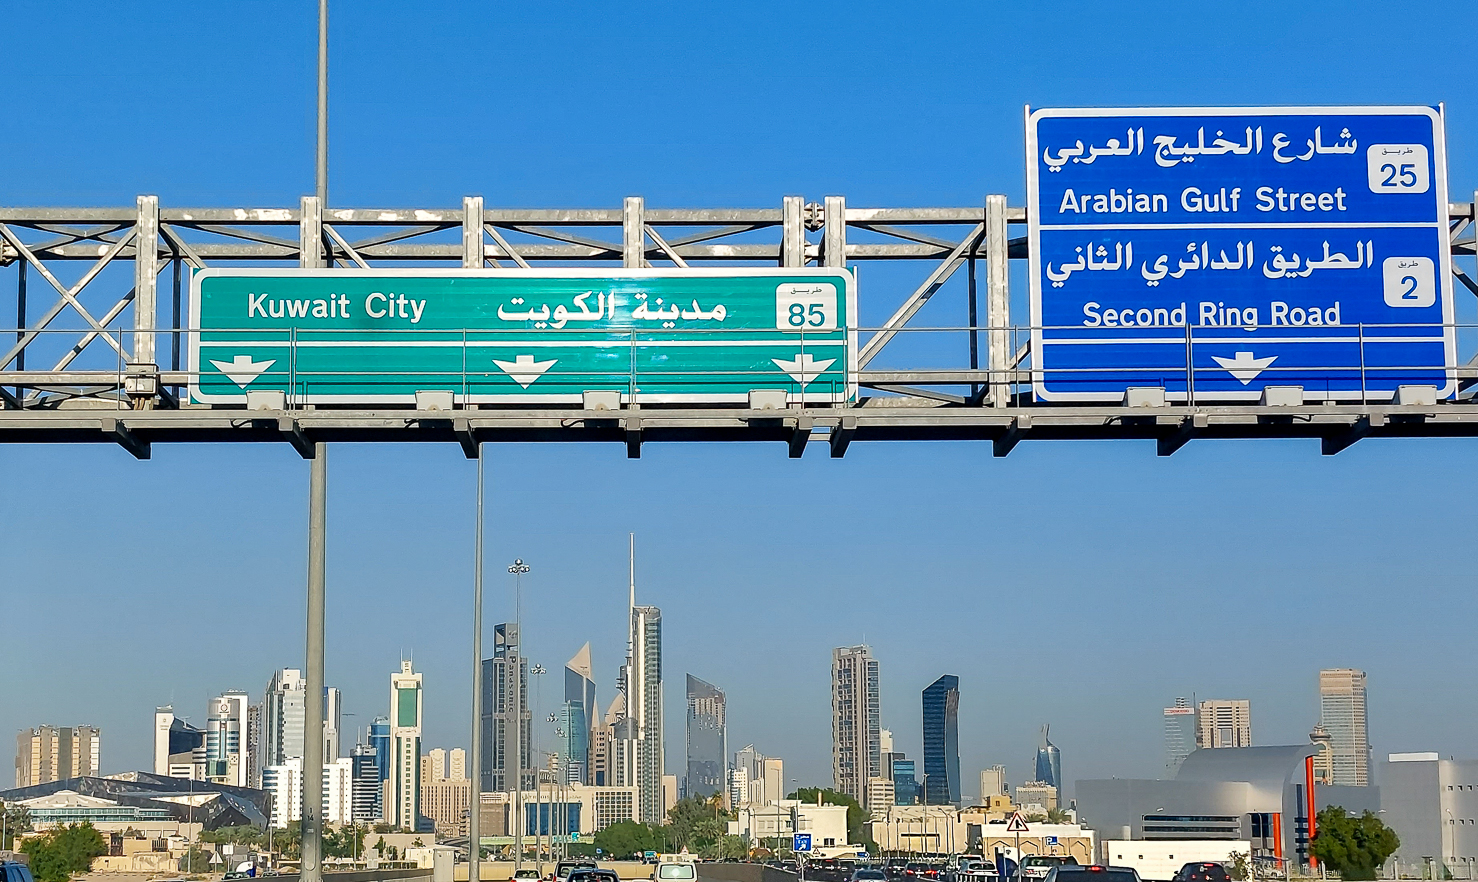 <span  class="uc_style_uc_tiles_grid_image_elementor_uc_items_attribute_title" style="color:#ffffff;">Welcome to Kuwait!</span>